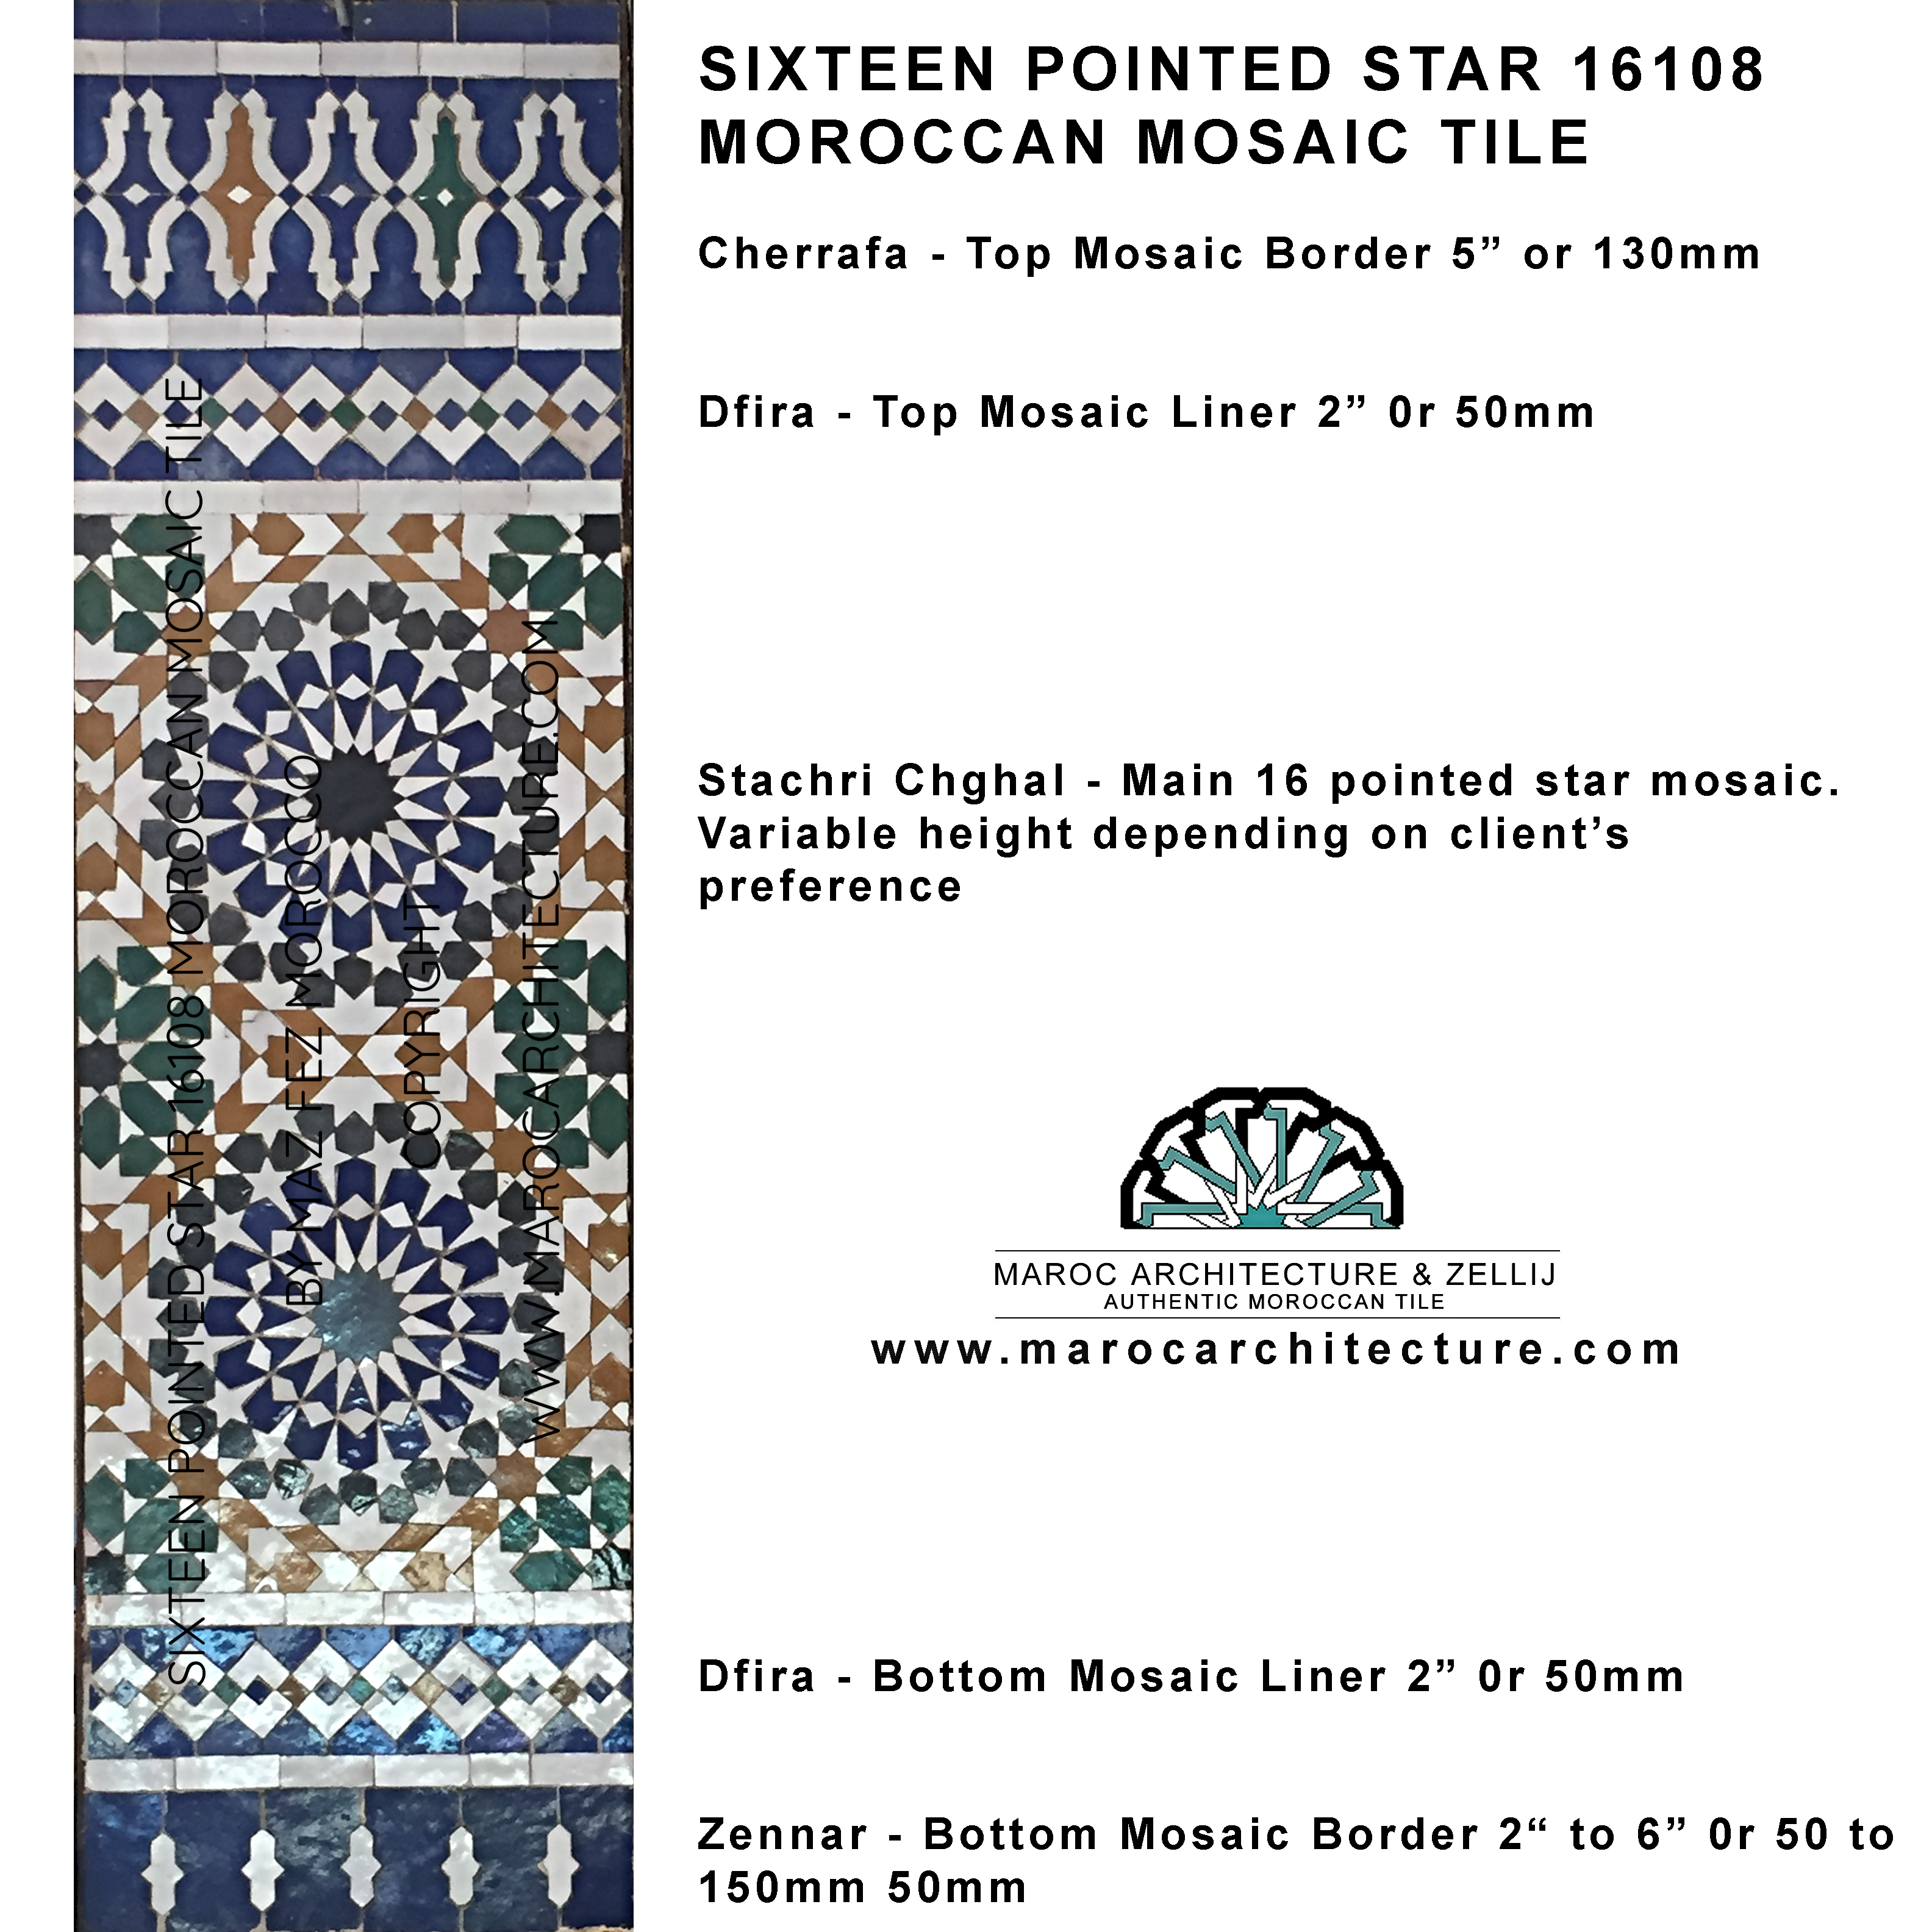 SIXTEEN POINTED STAR 16108 MOROCCAN MOSAIC TILE by MAROC ARCHITECTURE ET ZELLIJ